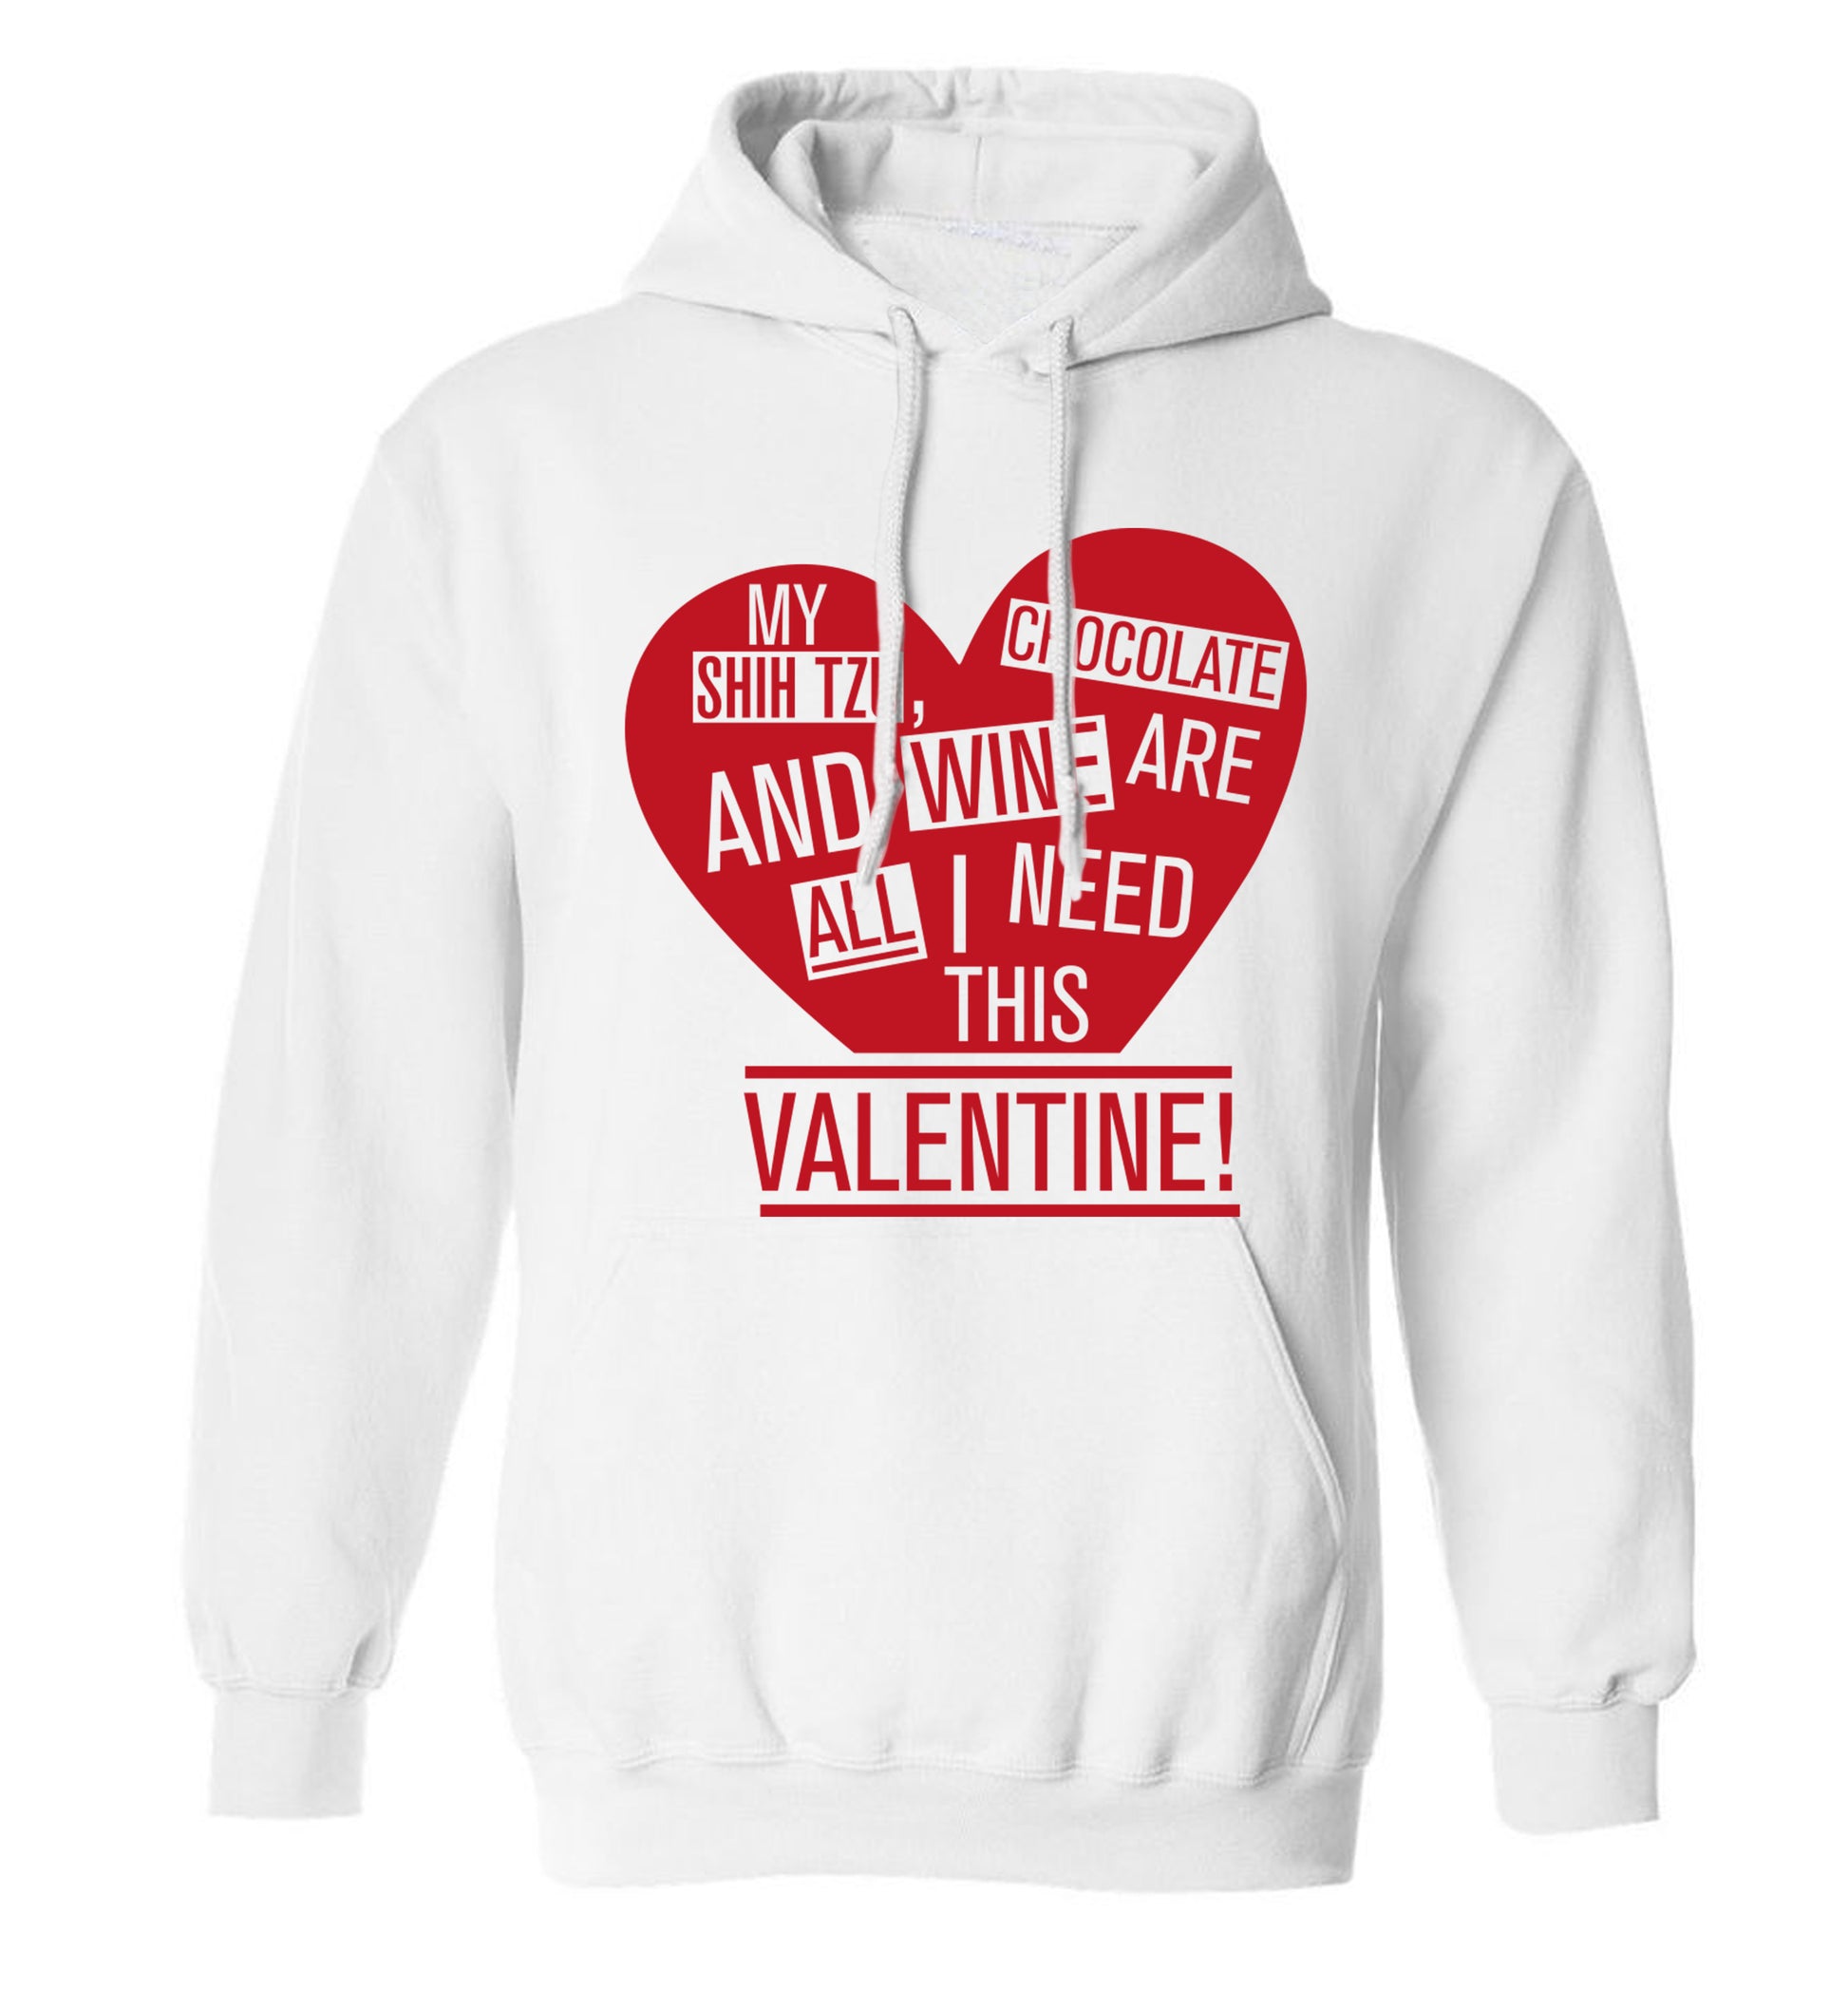 My shih tzu, chocolate and wine are all I need this valentine! adults unisex white hoodie 2XL